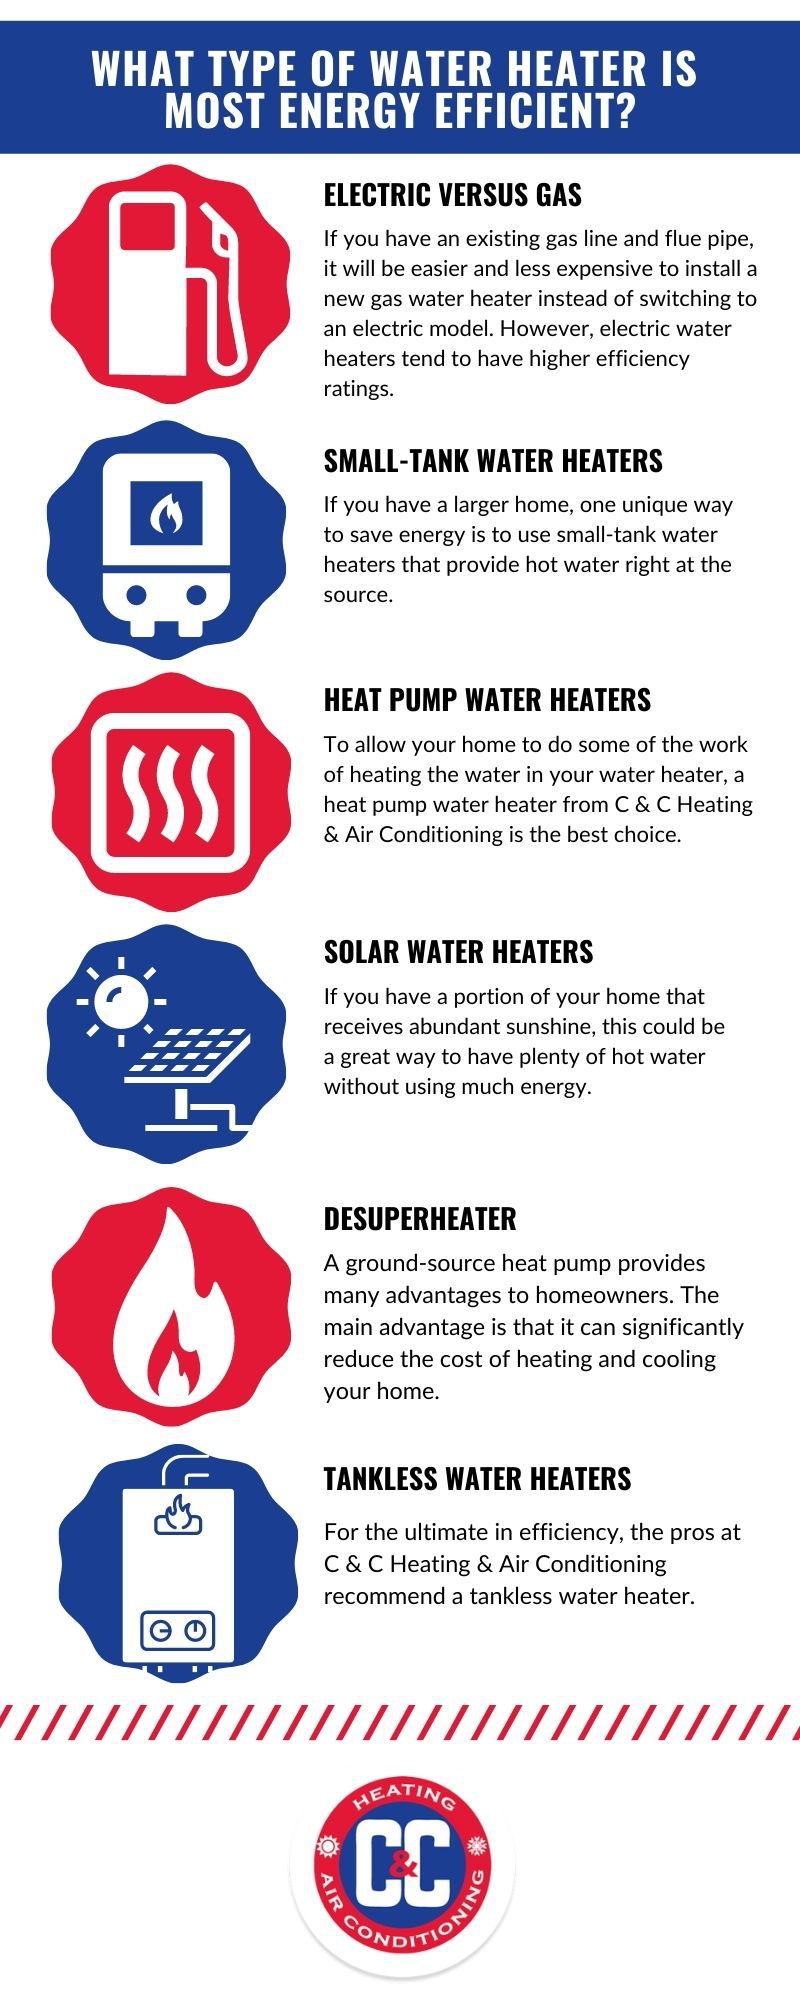 What Type Of Water Heater Is Most Energy Efficient